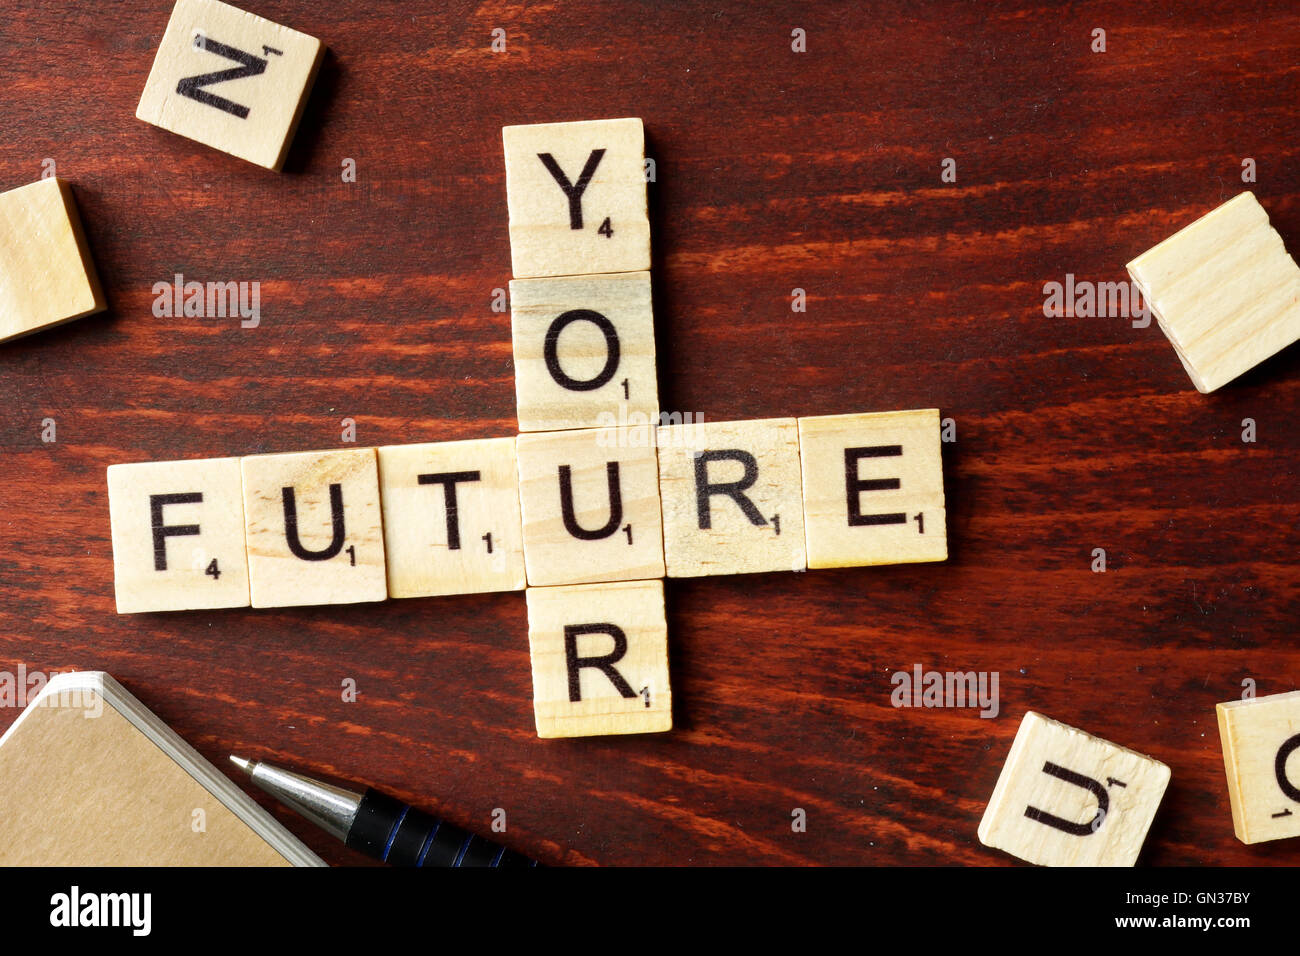 Words Your Future from wooden blocks with letters. Stock Photo